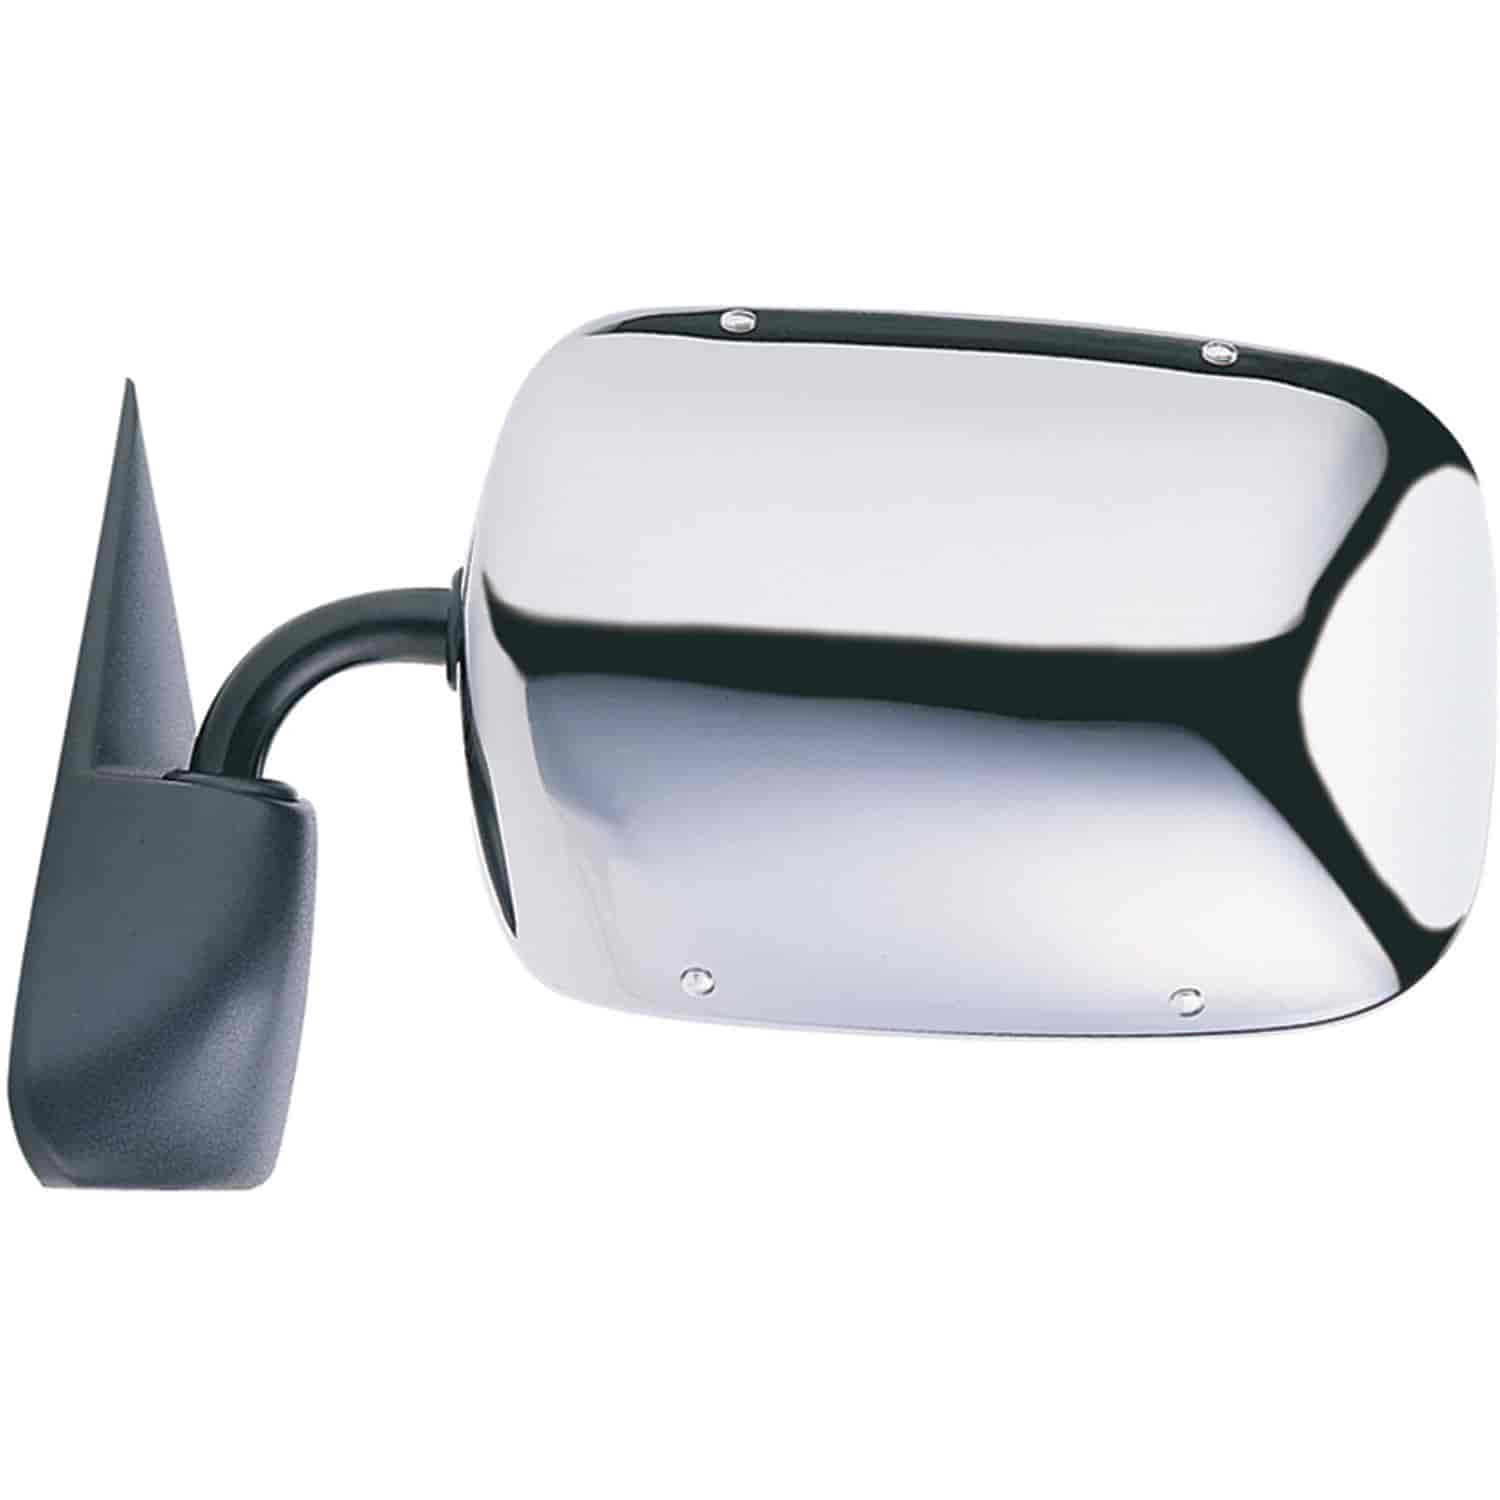 OEM Style Replacement mirror for 94-97 Dodge Pick-Up driver side mirror tested to fit and function l